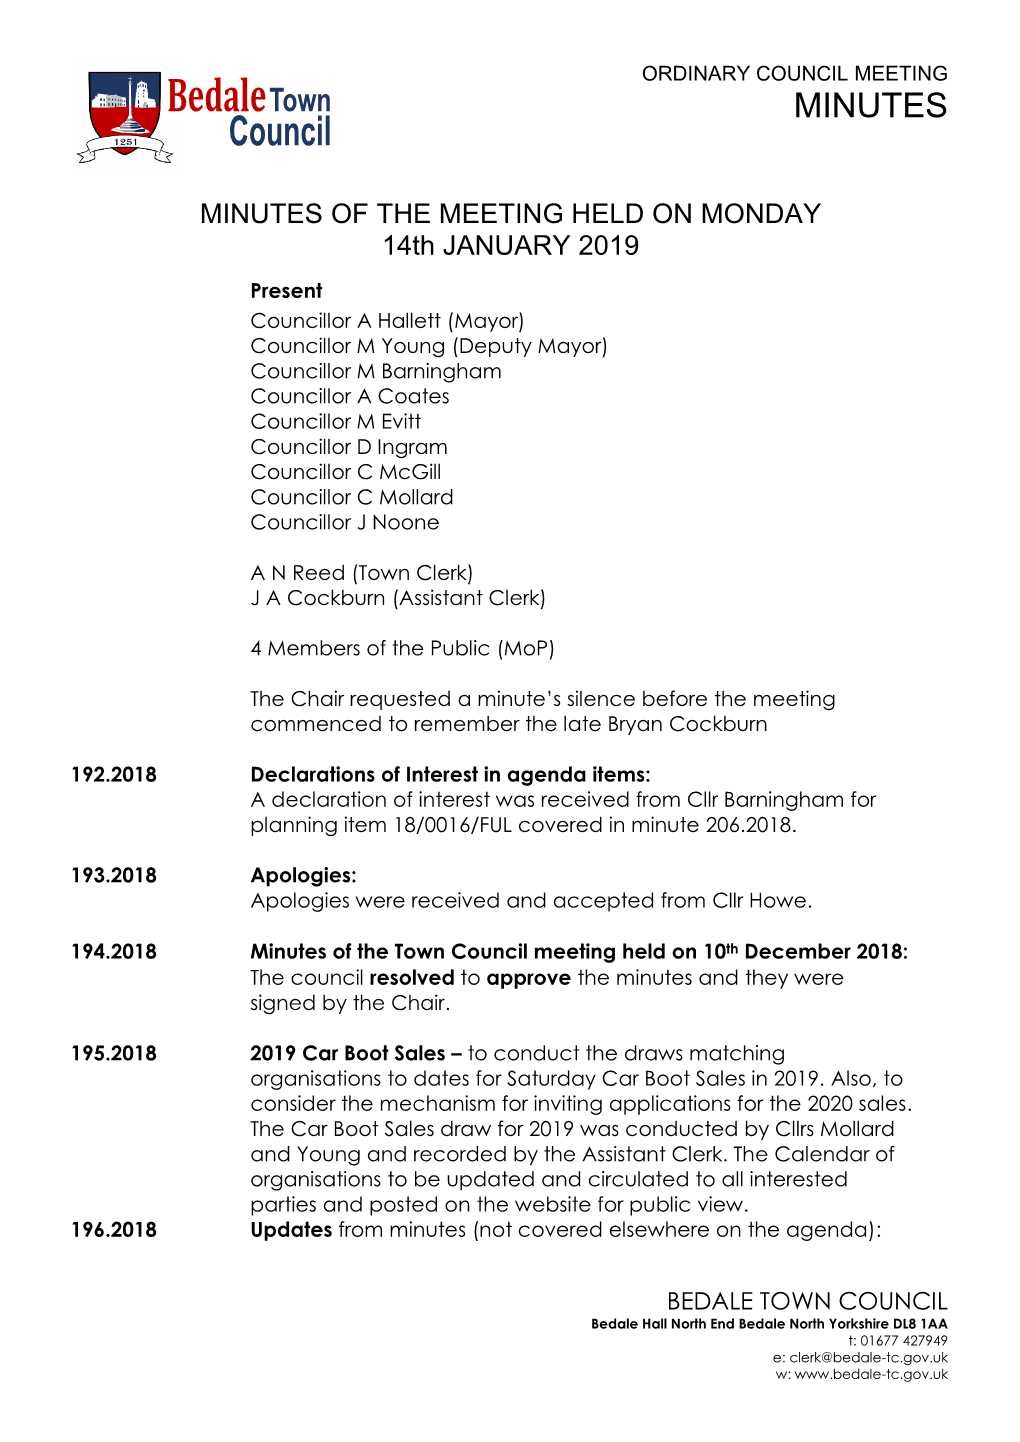 MINUTES of the MEETING HELD on MONDAY 14Th JANUARY 2019